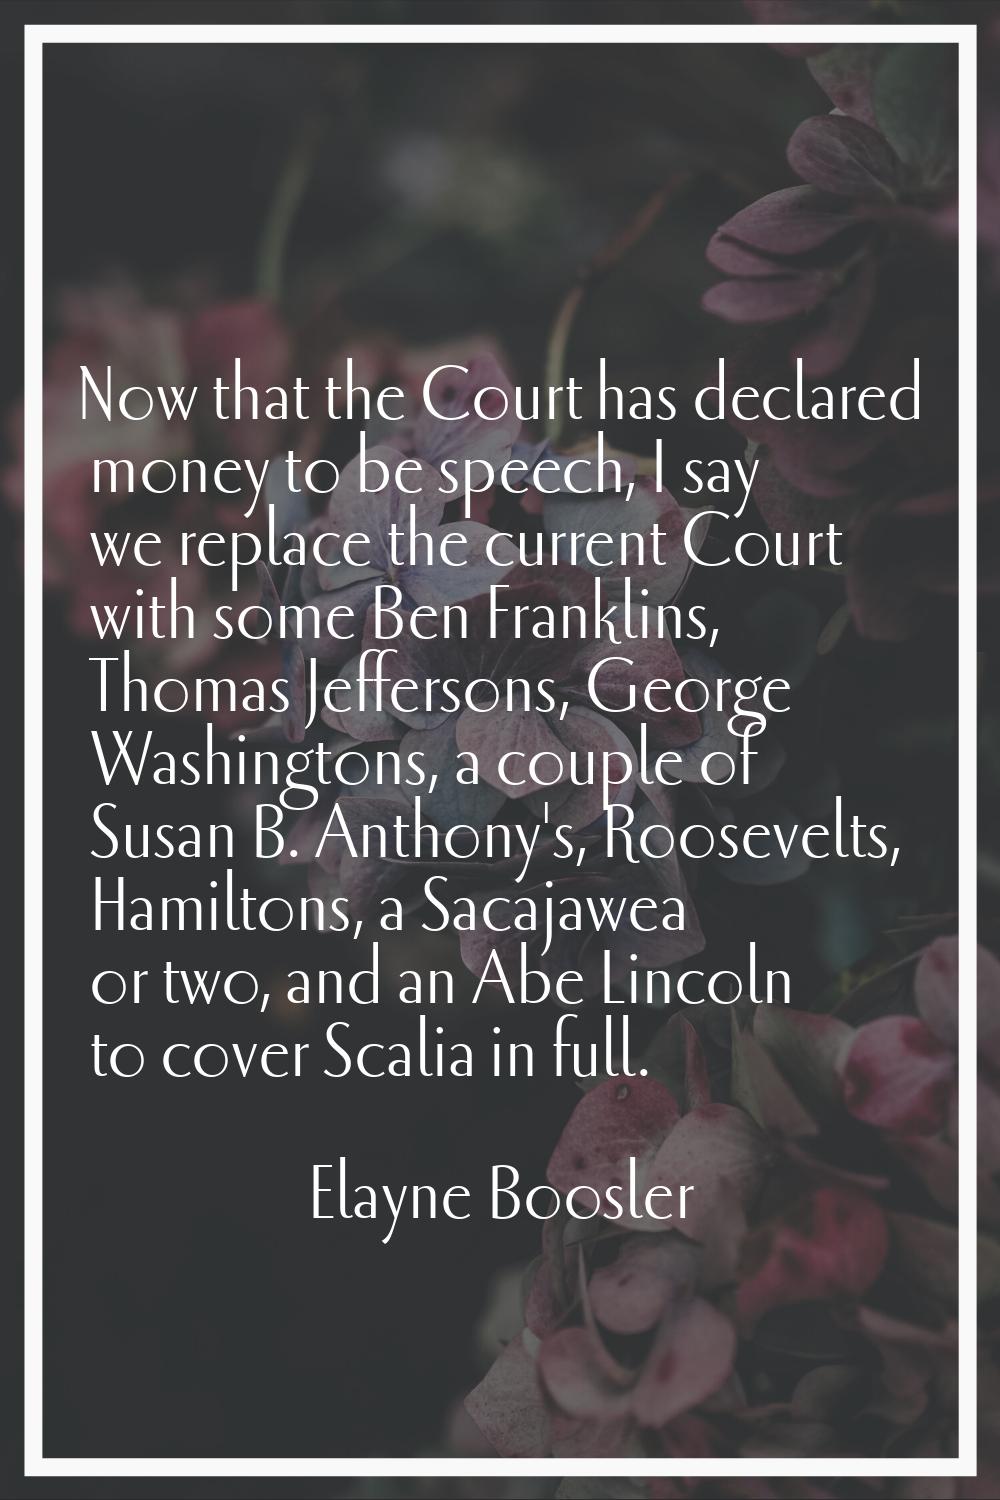 Now that the Court has declared money to be speech, I say we replace the current Court with some Be